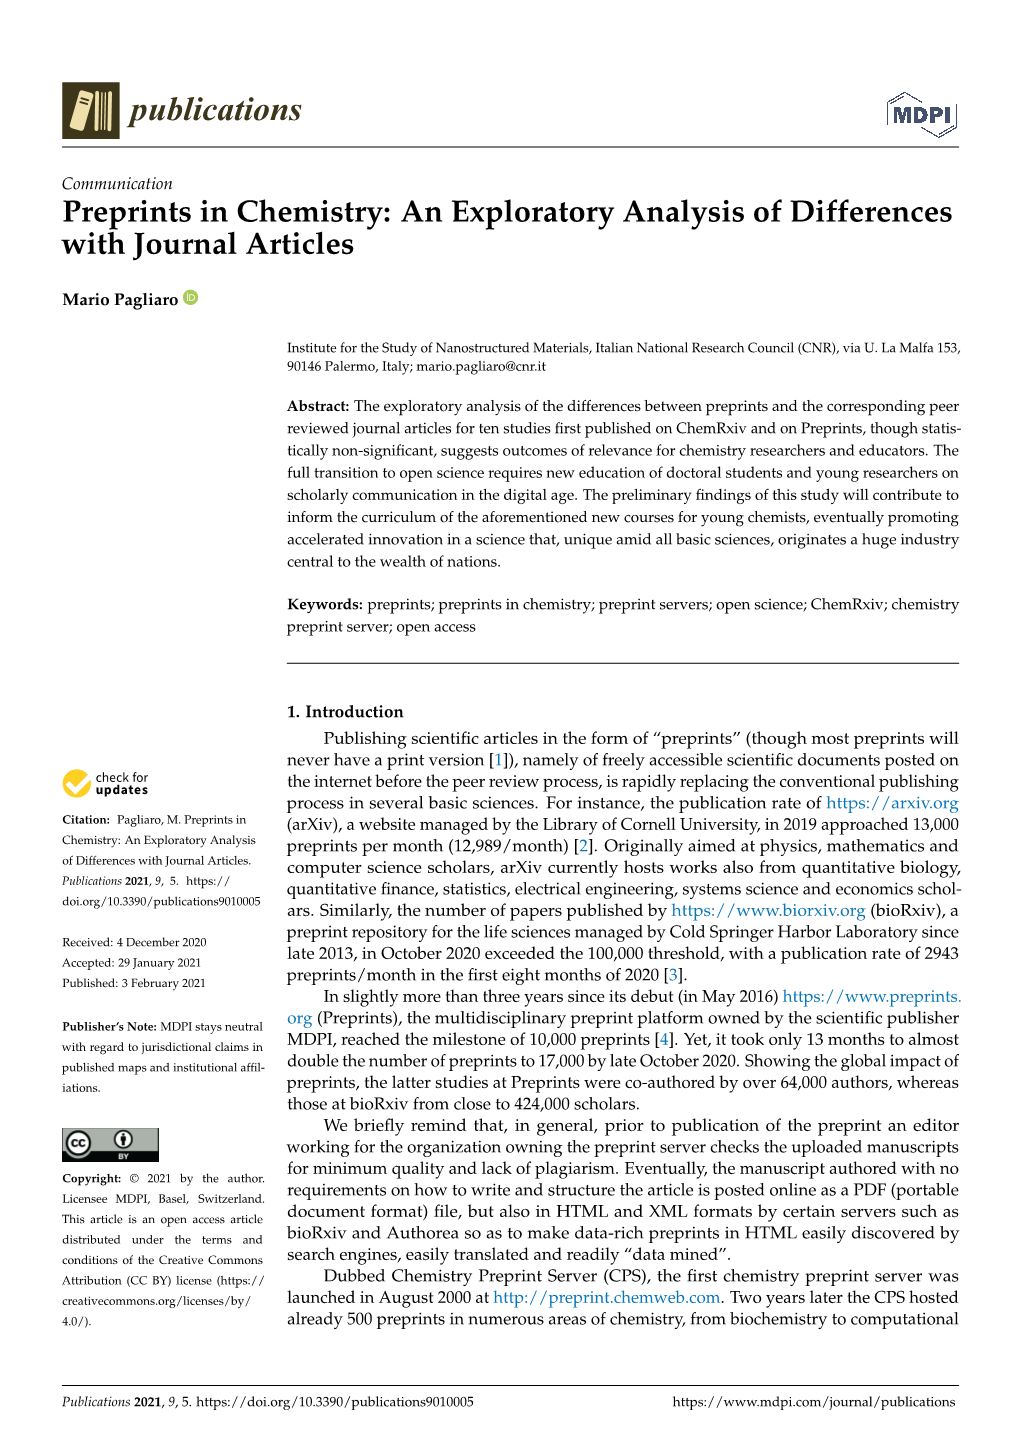 Preprints in Chemistry: an Exploratory Analysis of Differences with Journal Articles